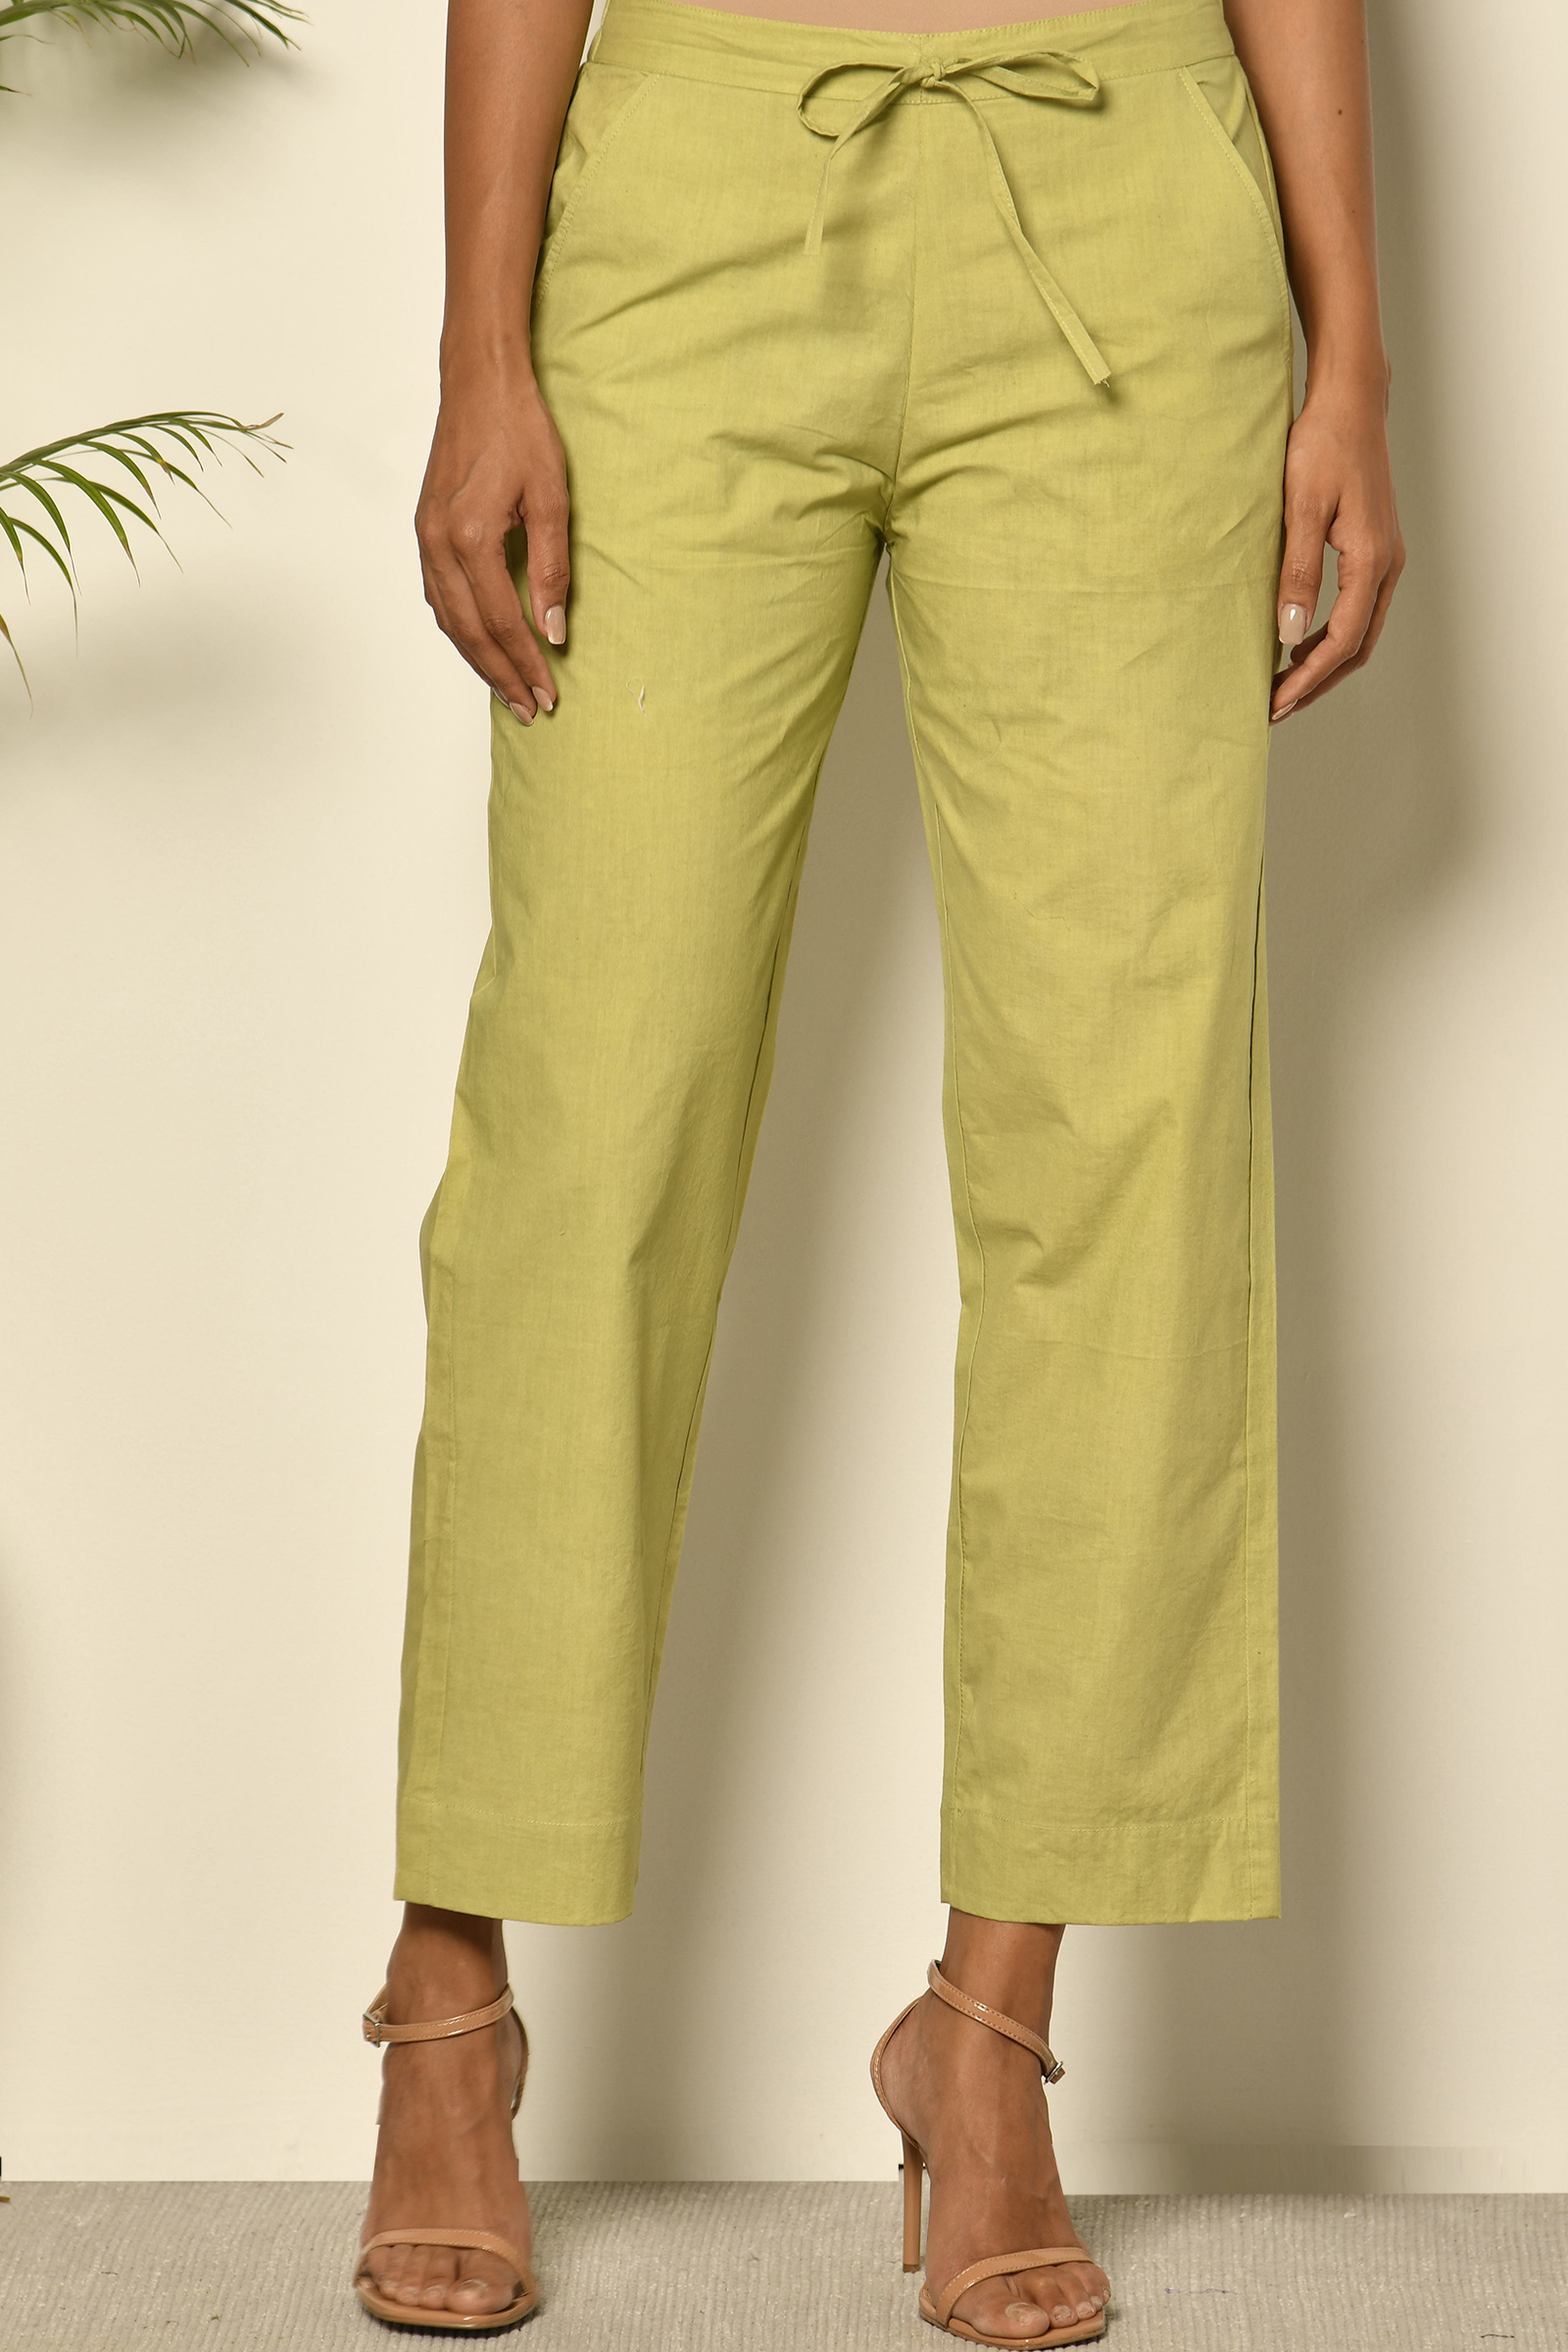 Wool Blend Straight Leg Pants, Fully Lined Fly Front Slant Pockets -  Chadwicks Timeless Classics